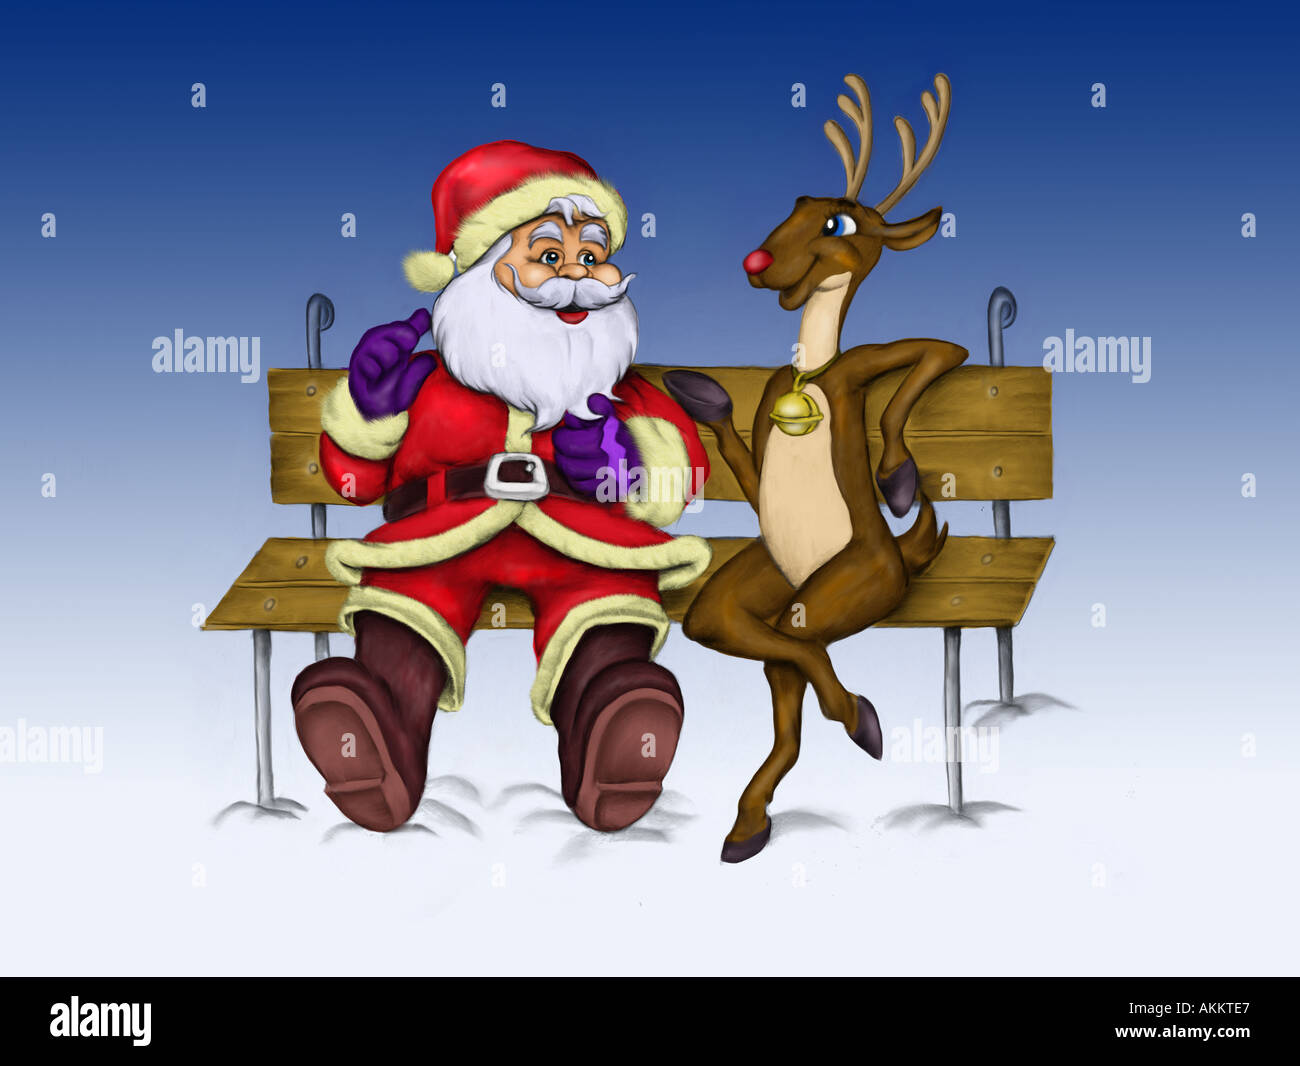 Illusration of Santa Claus talking to a reindeer, sitting on a bench. Stock Photo